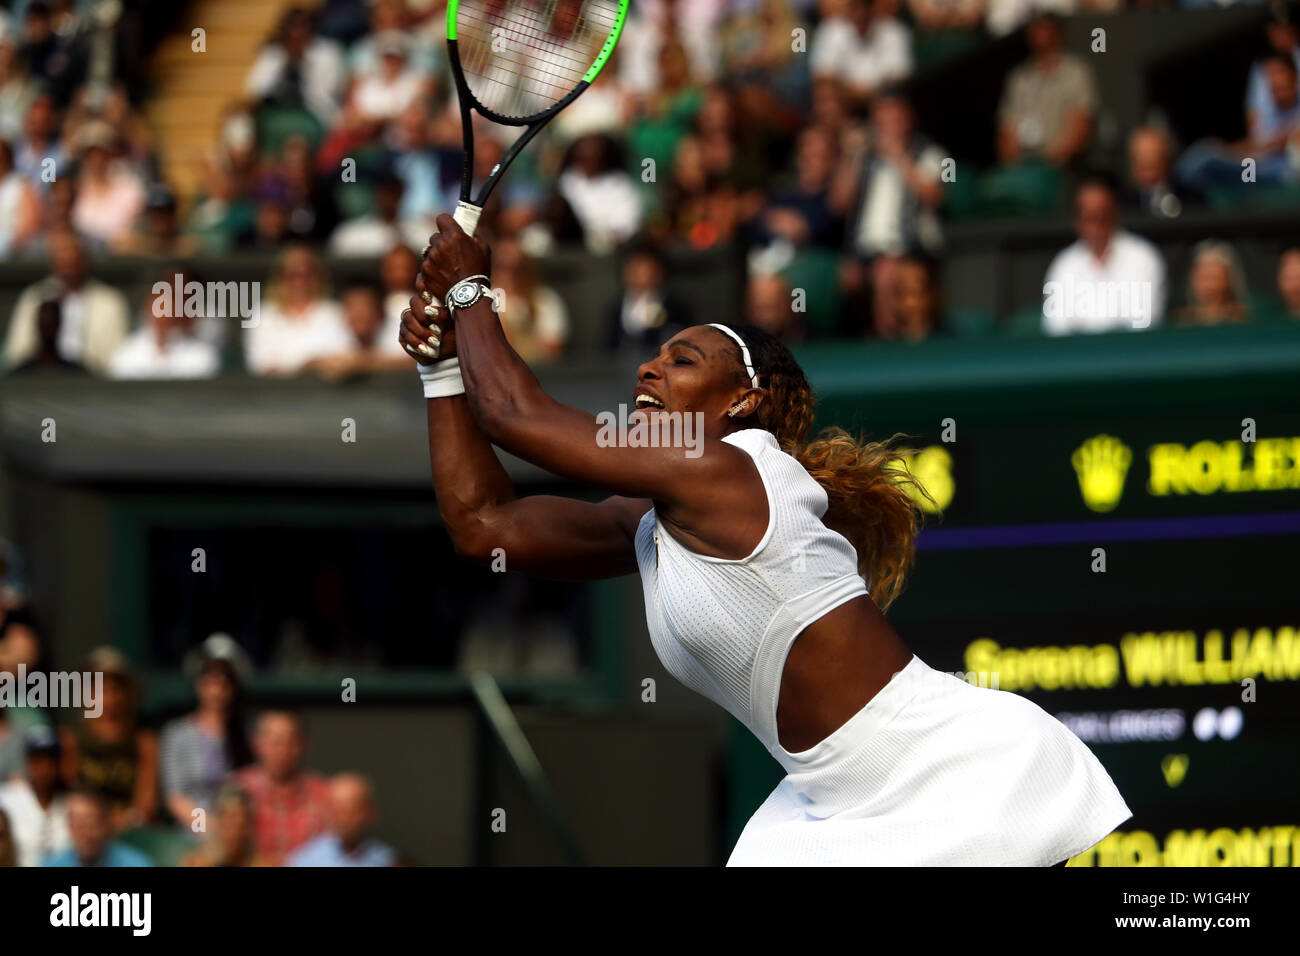 London, UK. 02nd July, 2019. Wimbledon, 2 July 2019 - Serena Williams in action during her first round victory over Giulia Gato-Monticone of Italy. Credit: Adam Stoltman/Alamy Live News Stock Photo